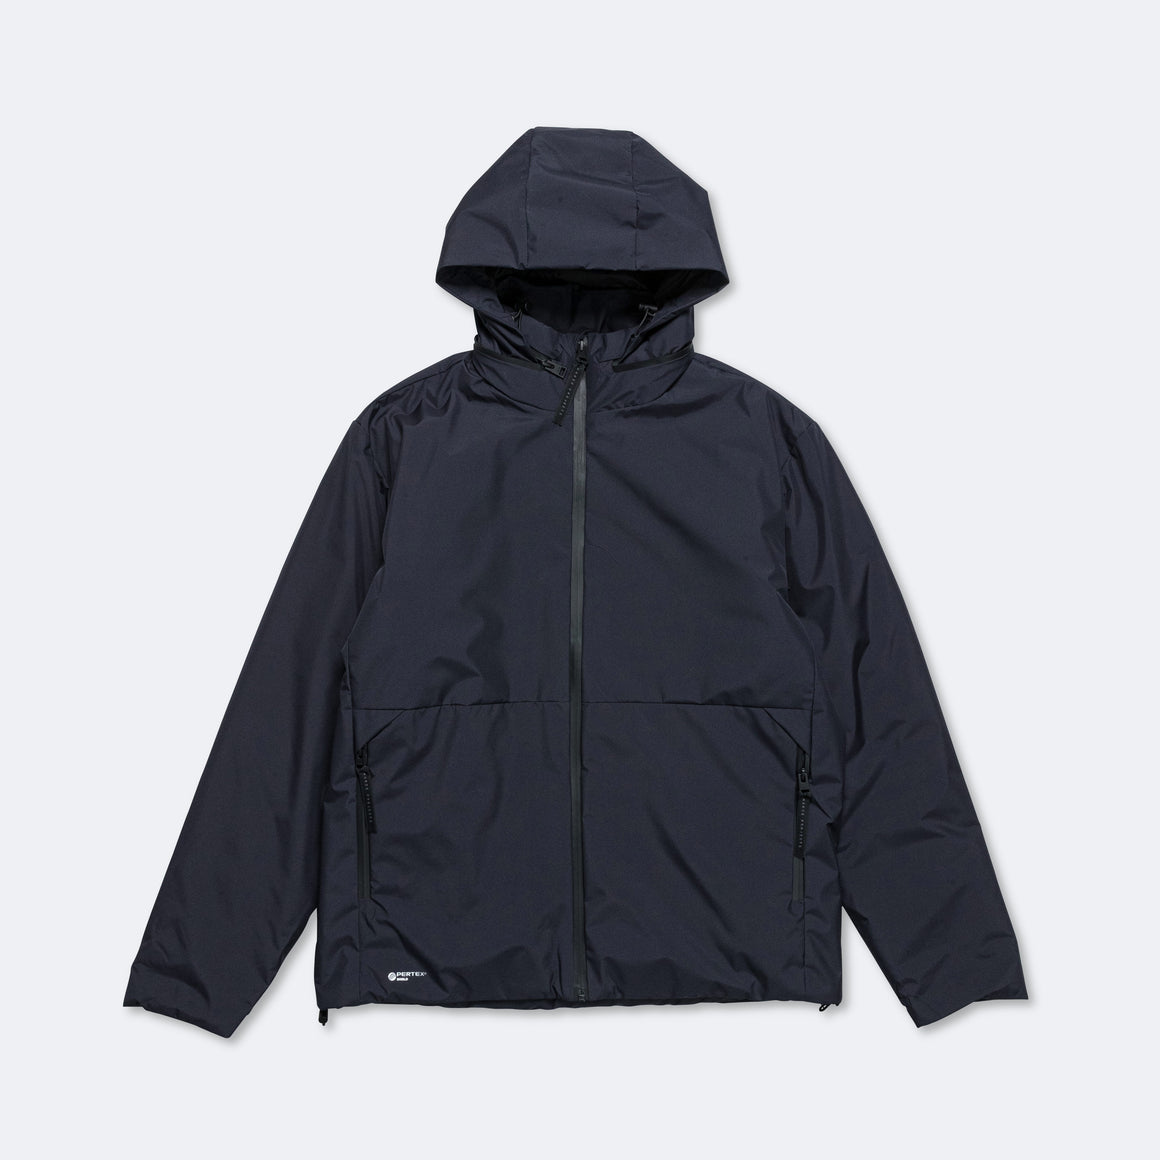 Norse Projects Arktisk - PERTEX Shield Midlayer Jacket - Dark Navy - UP THERE